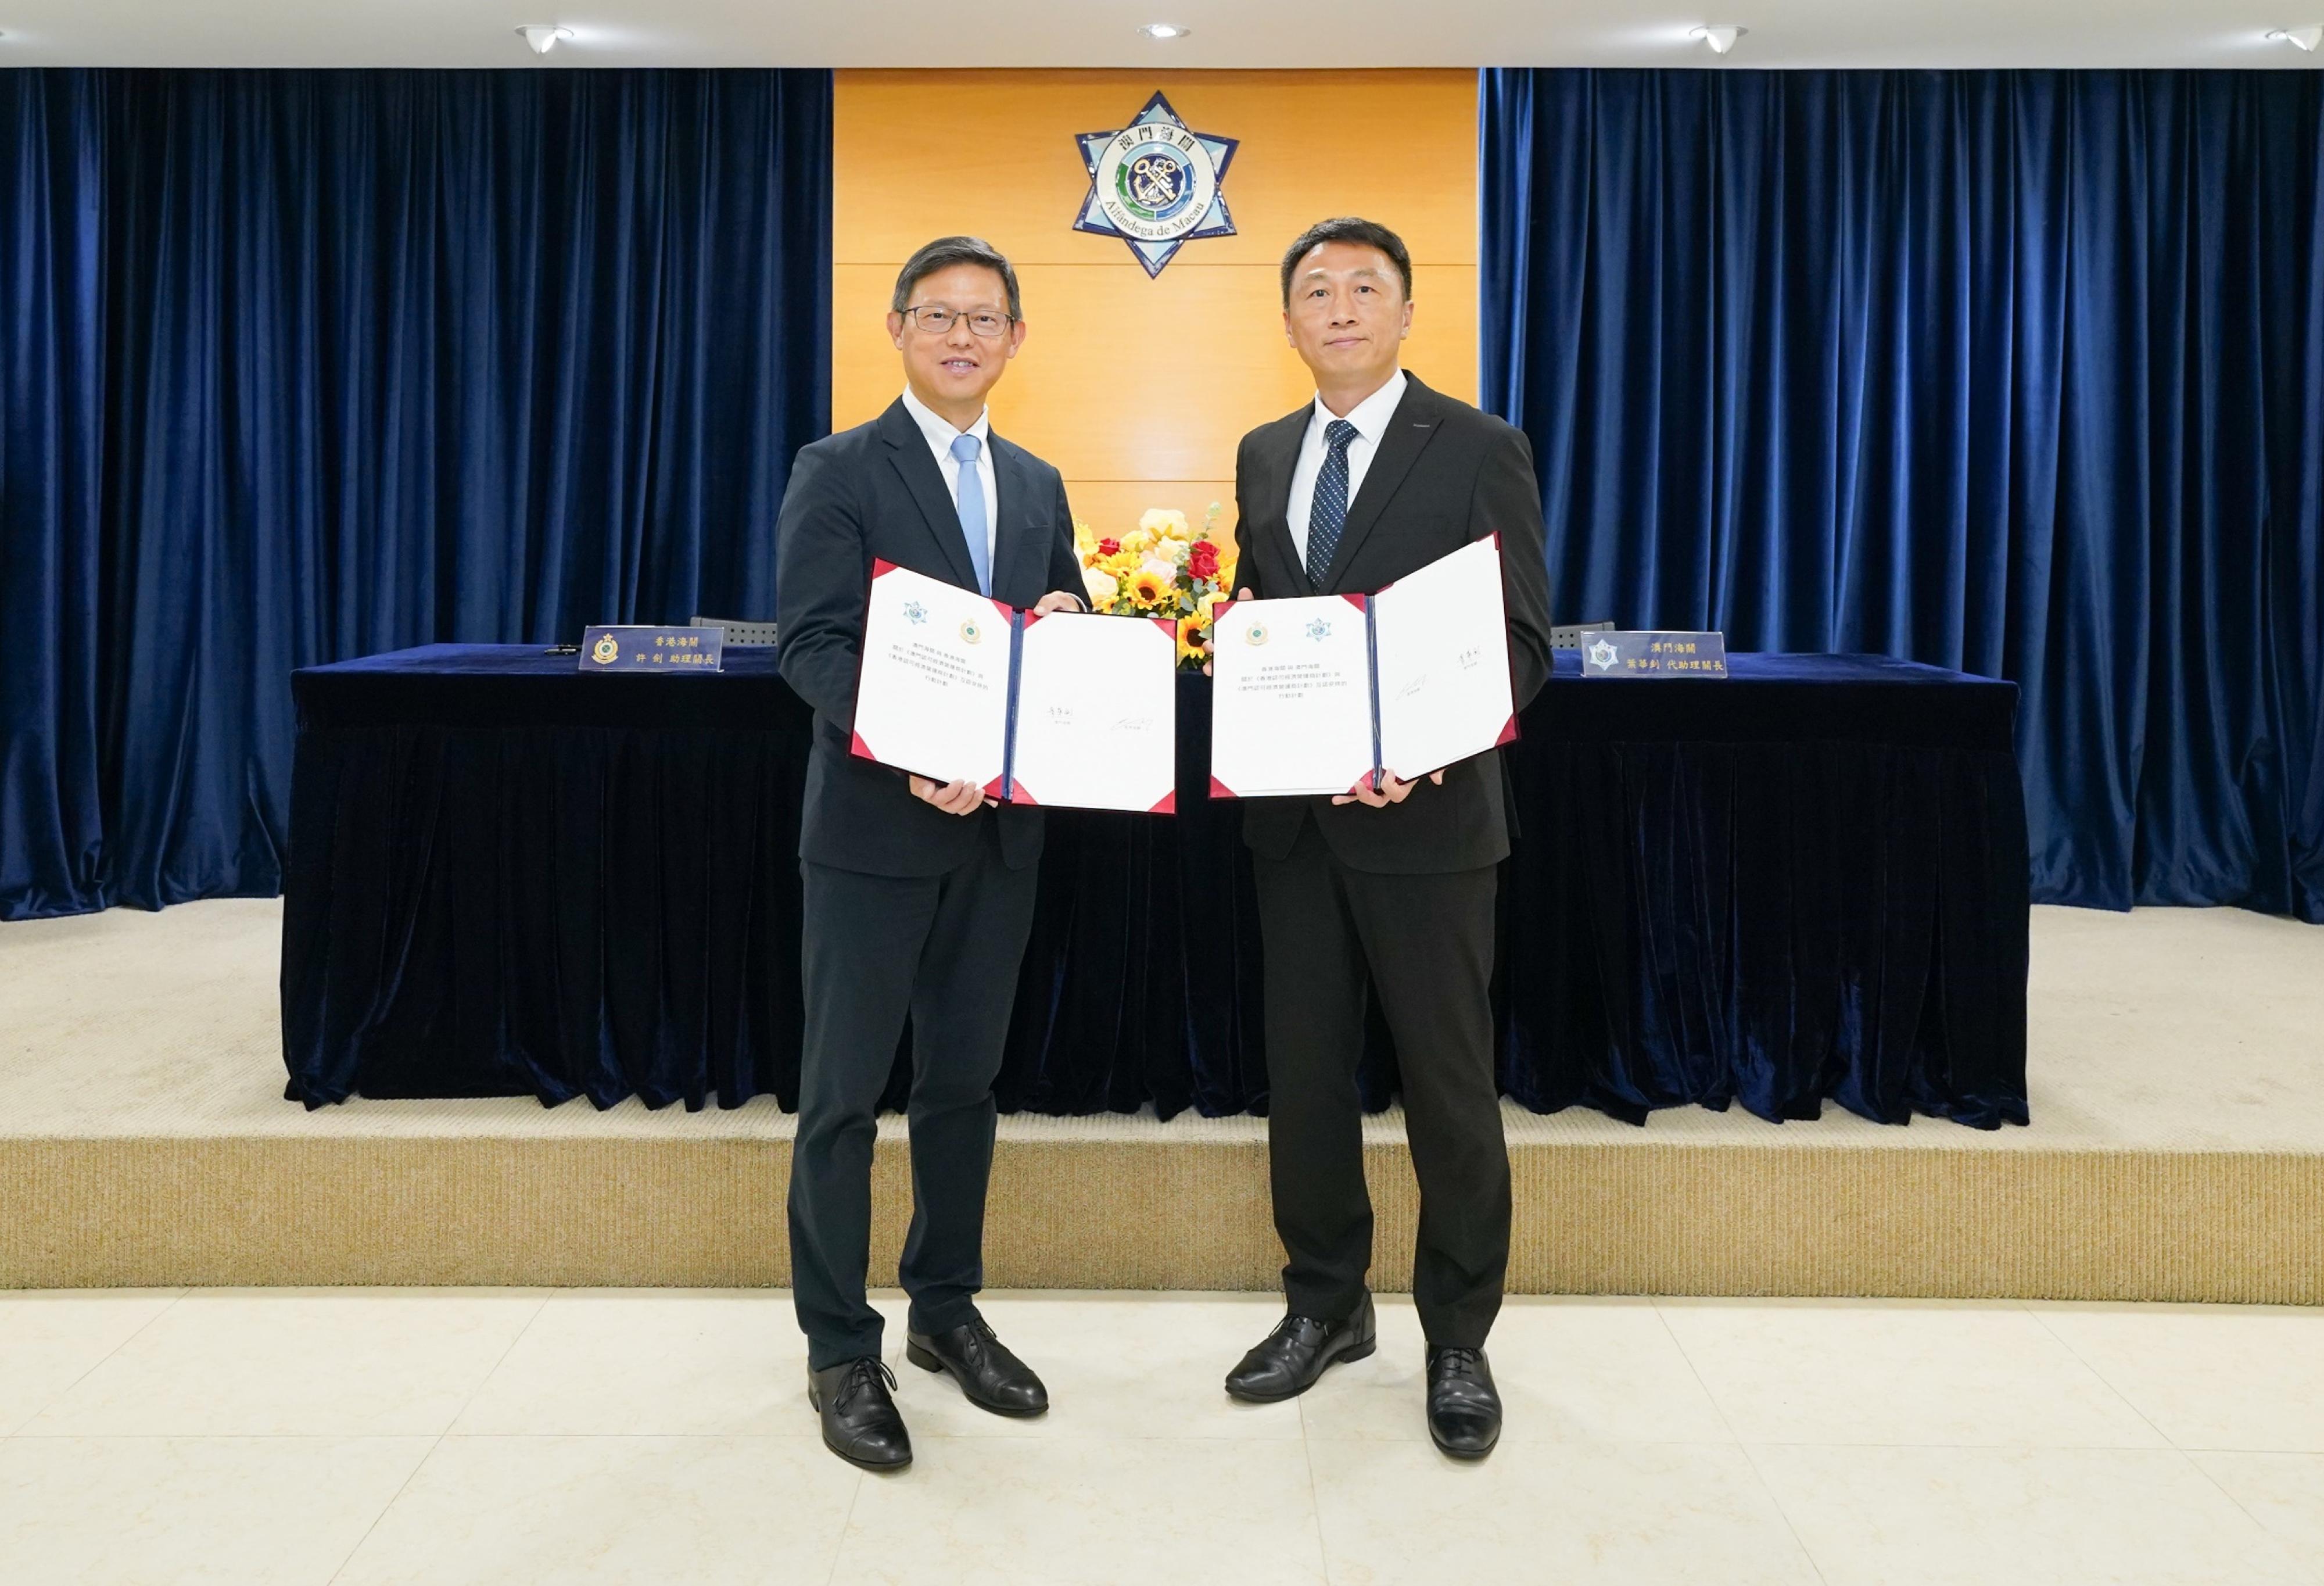 The Assistant Commissioner of Customs and Excise (Excise and Strategic Support), Mr Rudy Hui (left), today (September 14) in Macao signed the Authorized Economic Operator (AEO) Mutual Recognition Arrangement Action Plan with the Acting Assistant Director-General of Macao Customs Service, Mr Ip Va-chio (right), marking the commencement of the formal negotiation stage for mutual recognition of the AEO of both sides. Photo shows the exchange of the signed Action Plan between the two sides.
